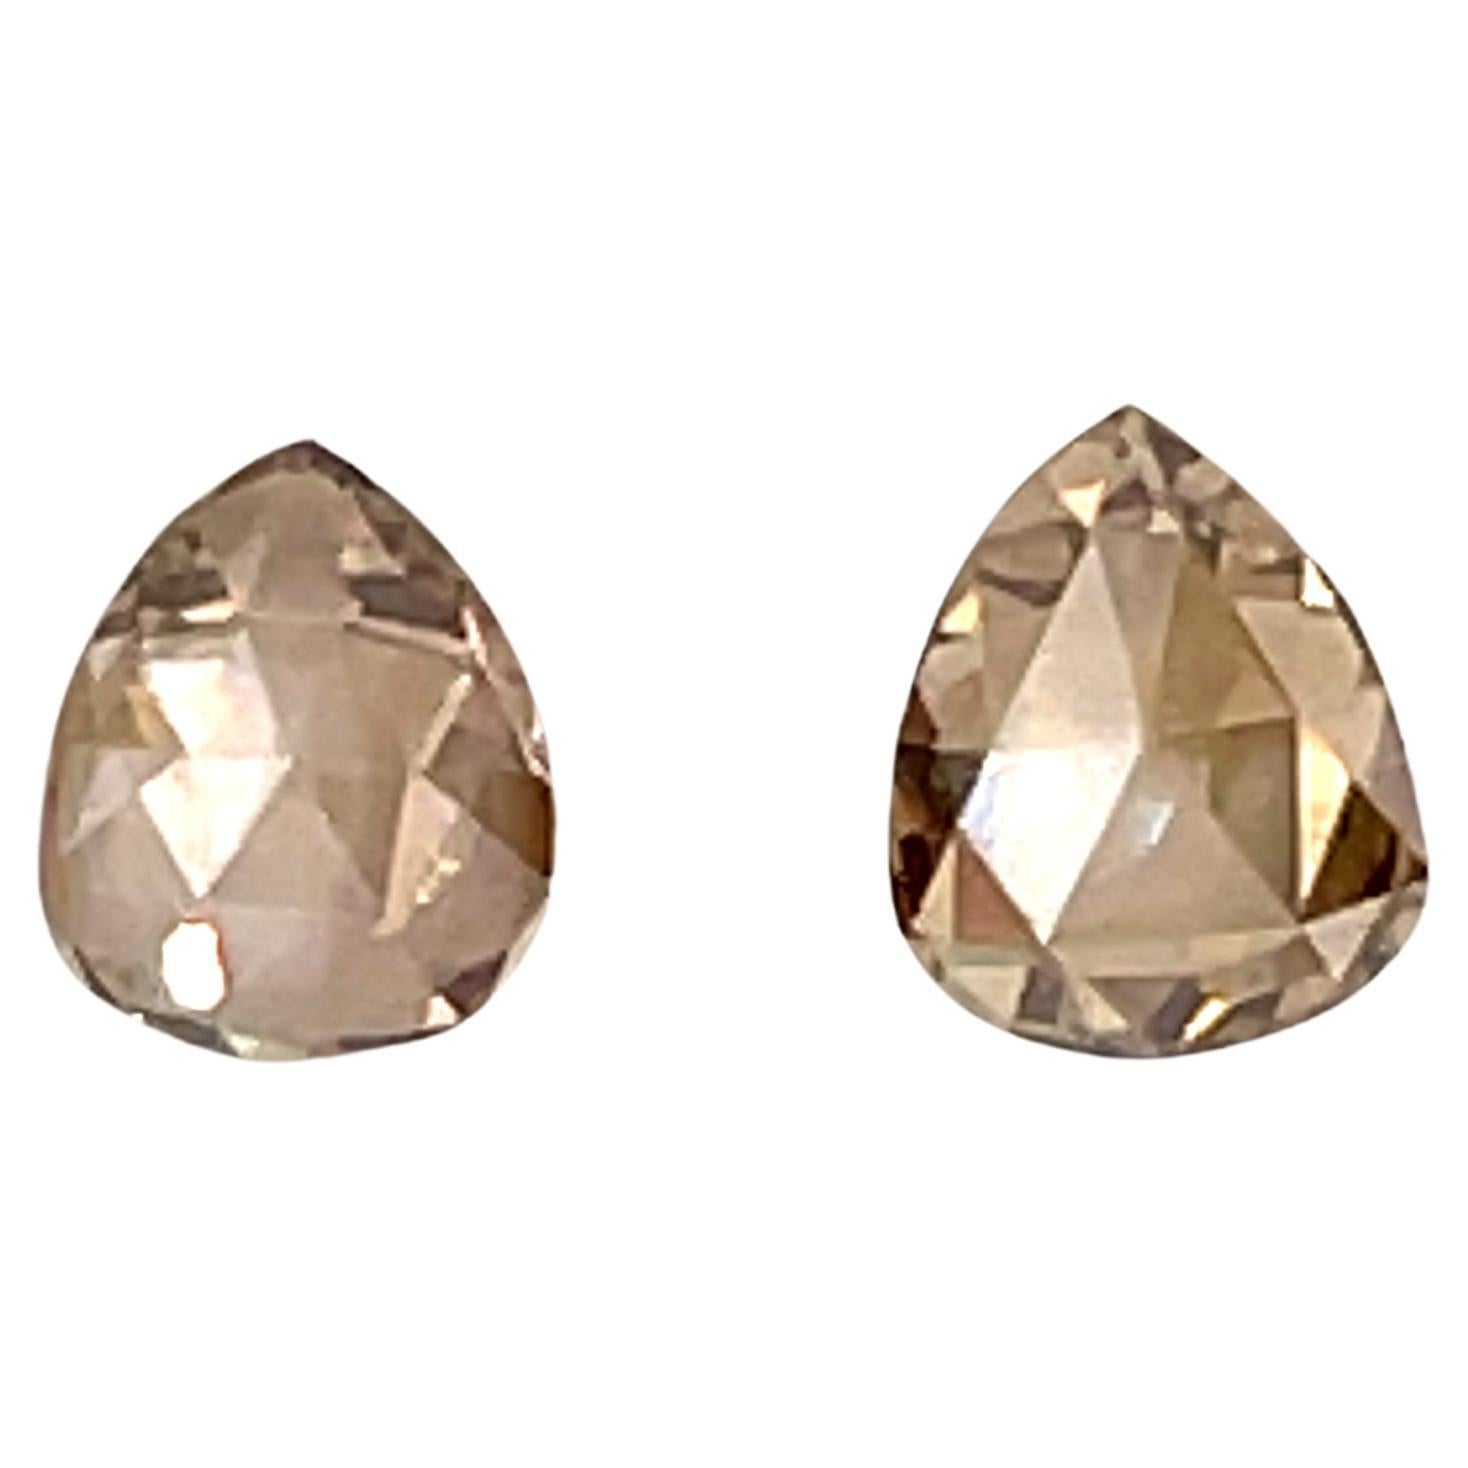 2 Pear-Shaped Brown Diamonds Cts 2.05 For Sale